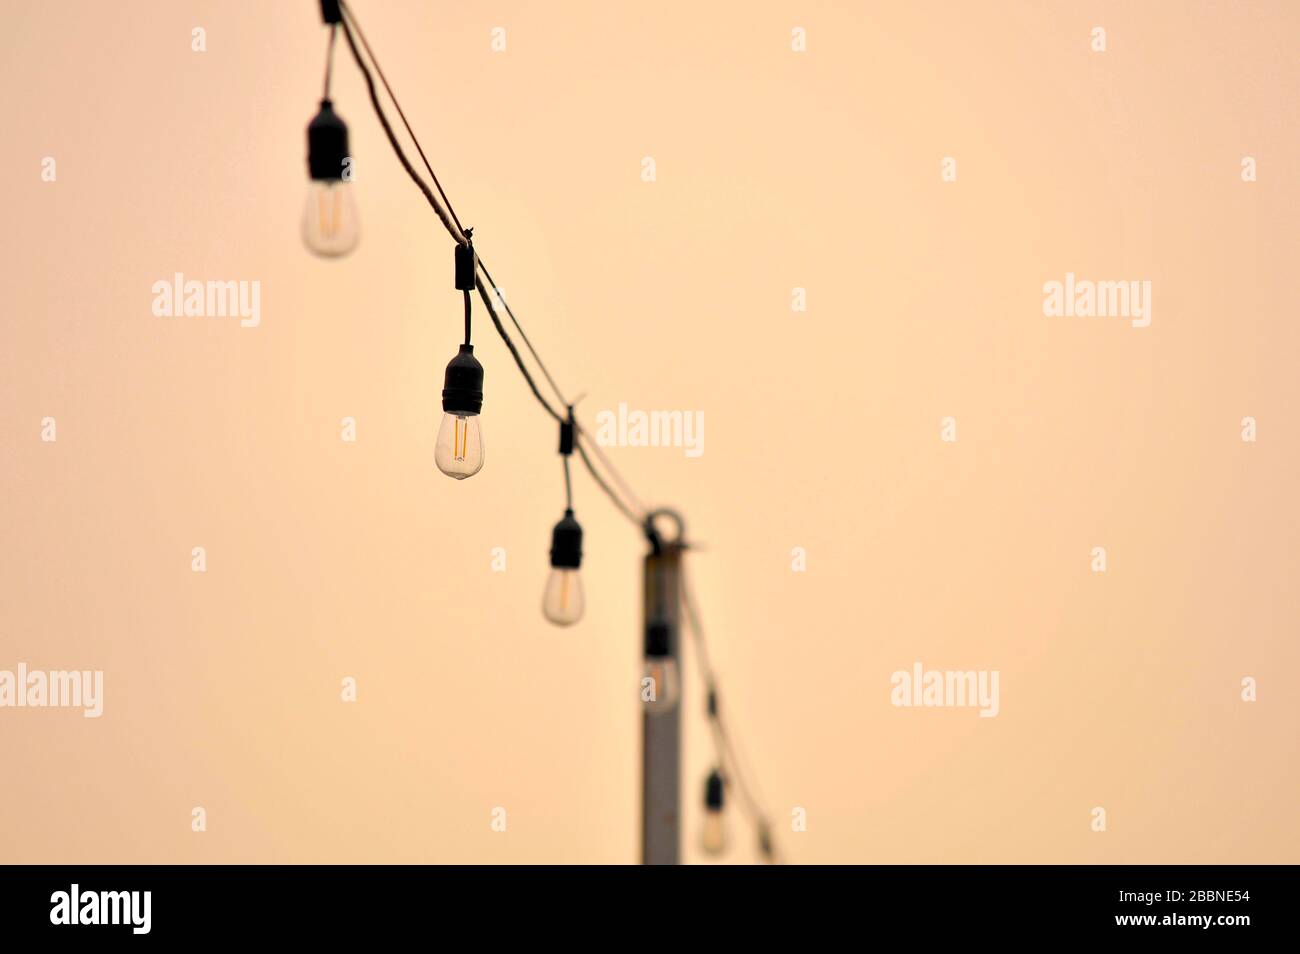 String of electric light bulbs on a pale orange sky background Stock Photo